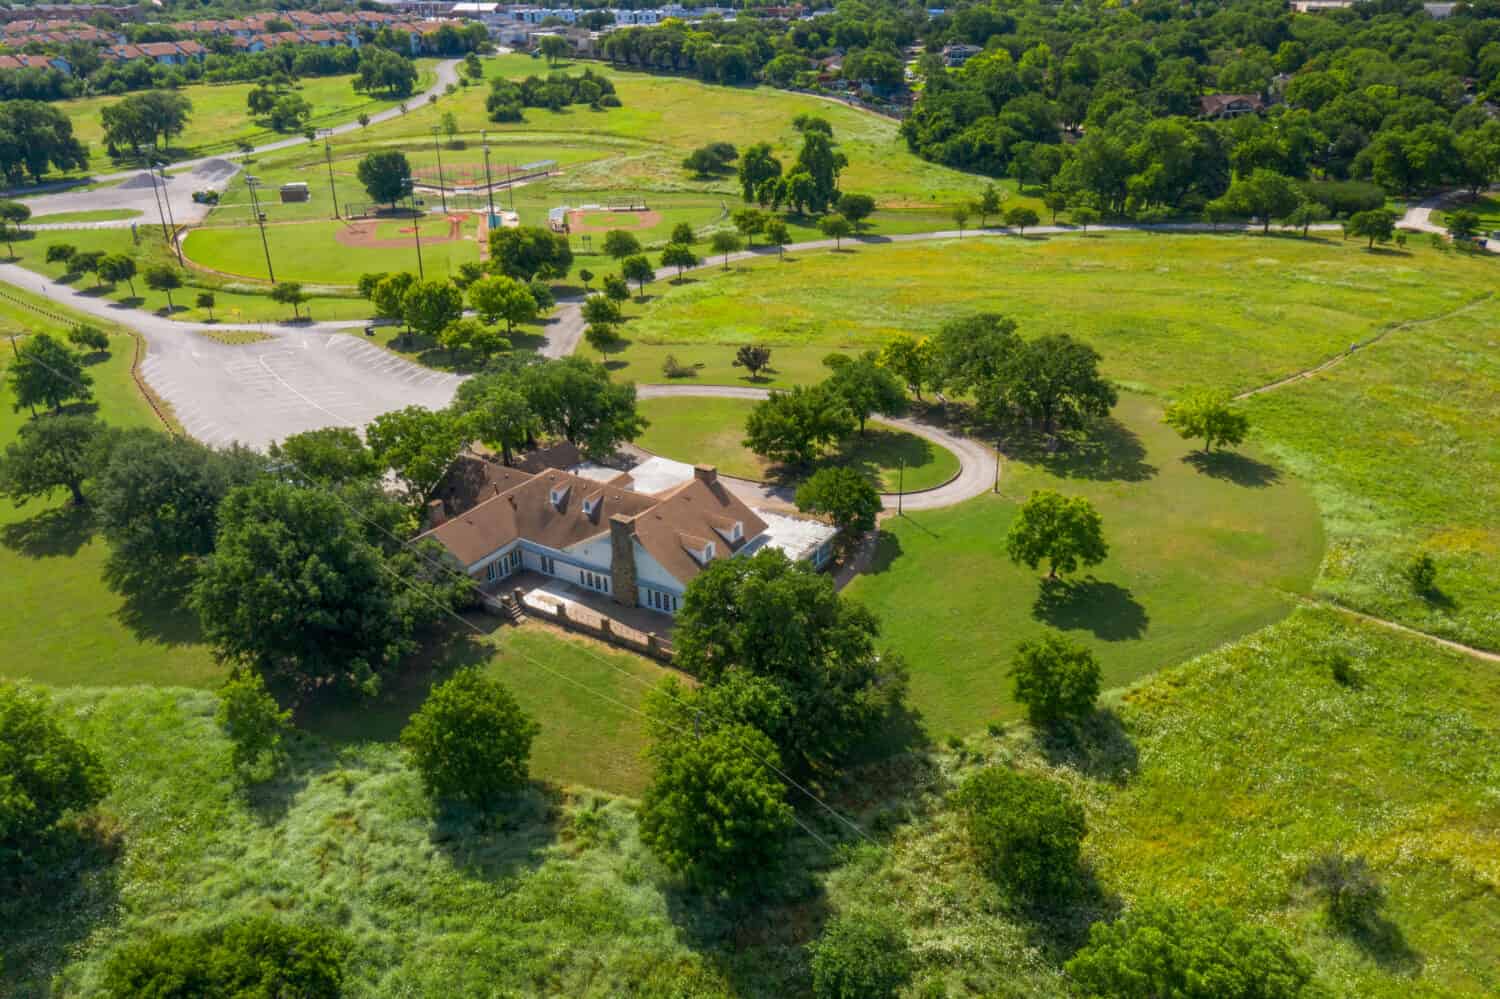 The Winfrey Point building at White Rock Lake, Dallas taken from an aerial perspective. 